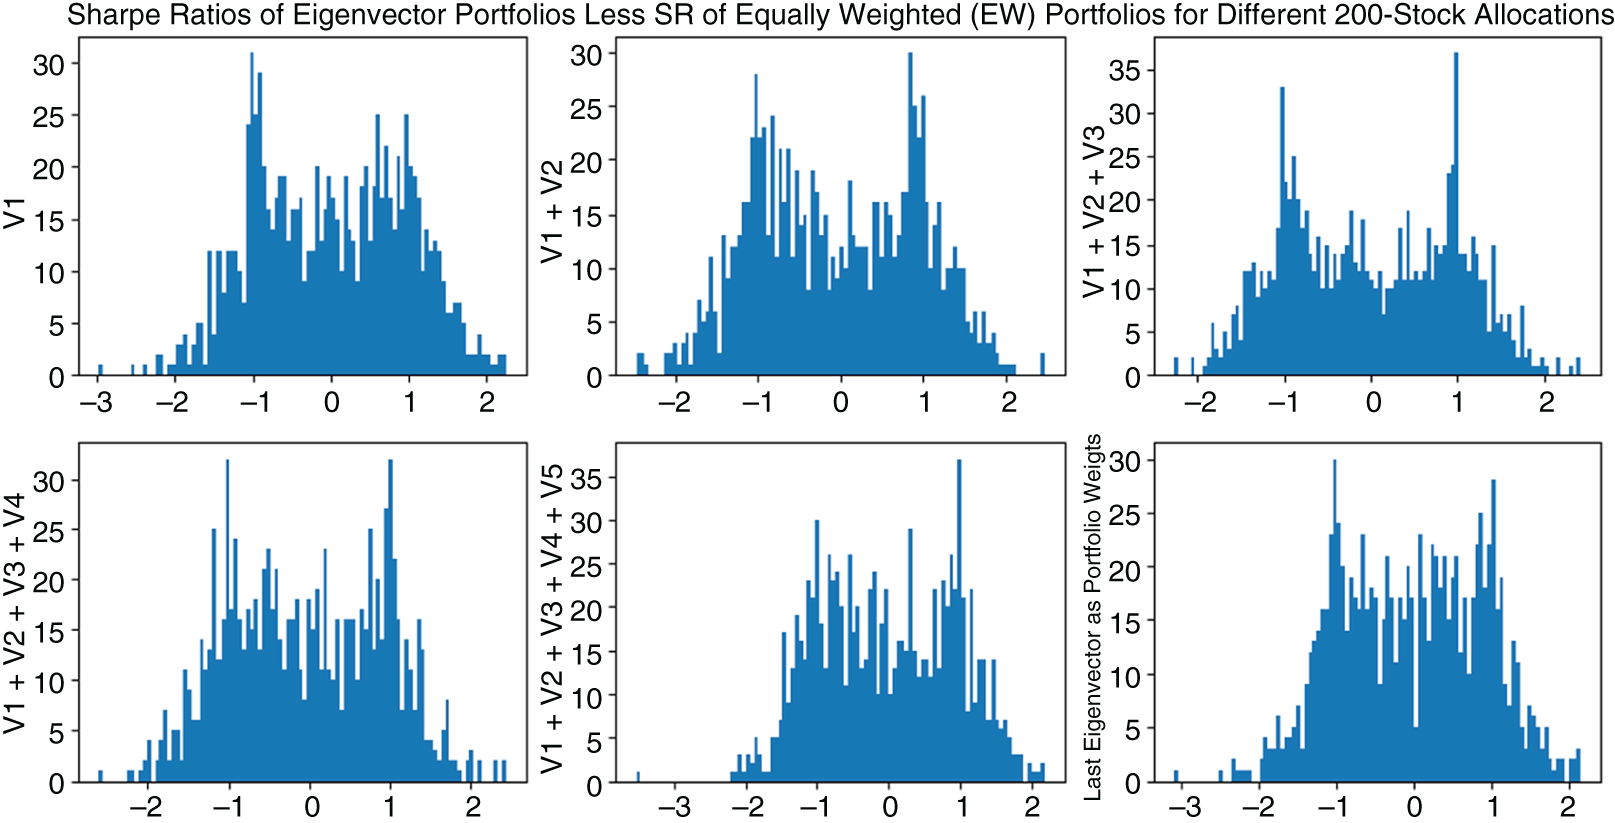 Graphs depict the distribution of Excess Sharpe ratios of 1,000 random portfolios allocated according to the coefficients of their returns' first 5 singular vectors and the very last singular vector. All the portfolio Sharpe ratios are adjusted by their Equally Weighted Sharpe ratio.